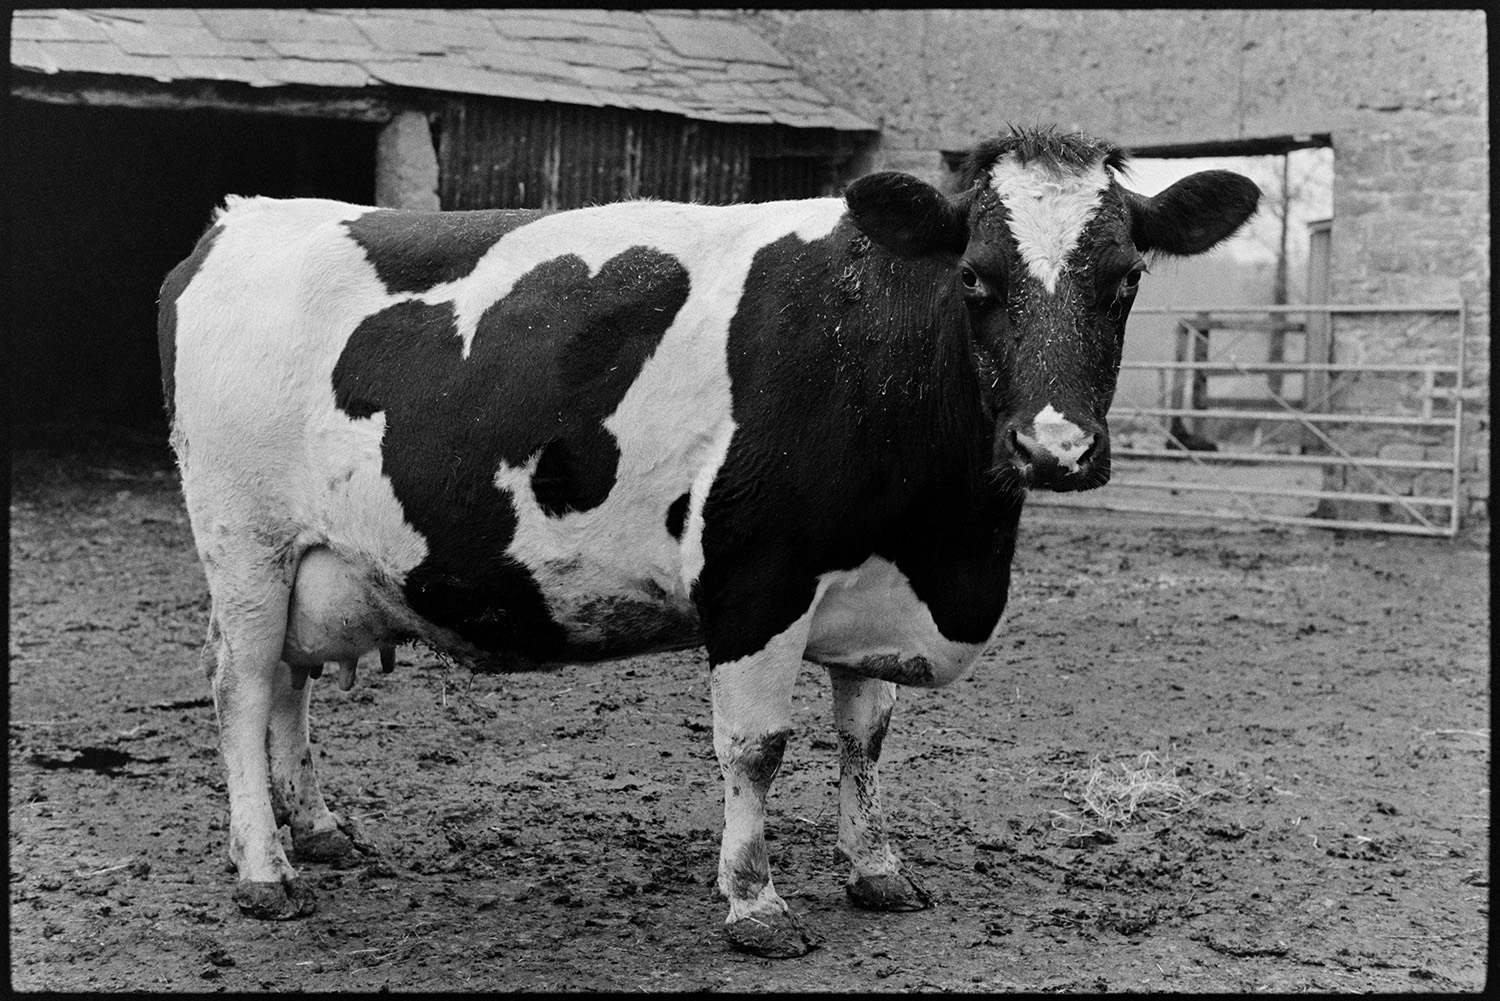 Cows Jersey Friesian. 
[A Friesian cow stood in a muddy farmyard at Nethercott, Iddesleigh. Farm buildings can be seen in the background.]